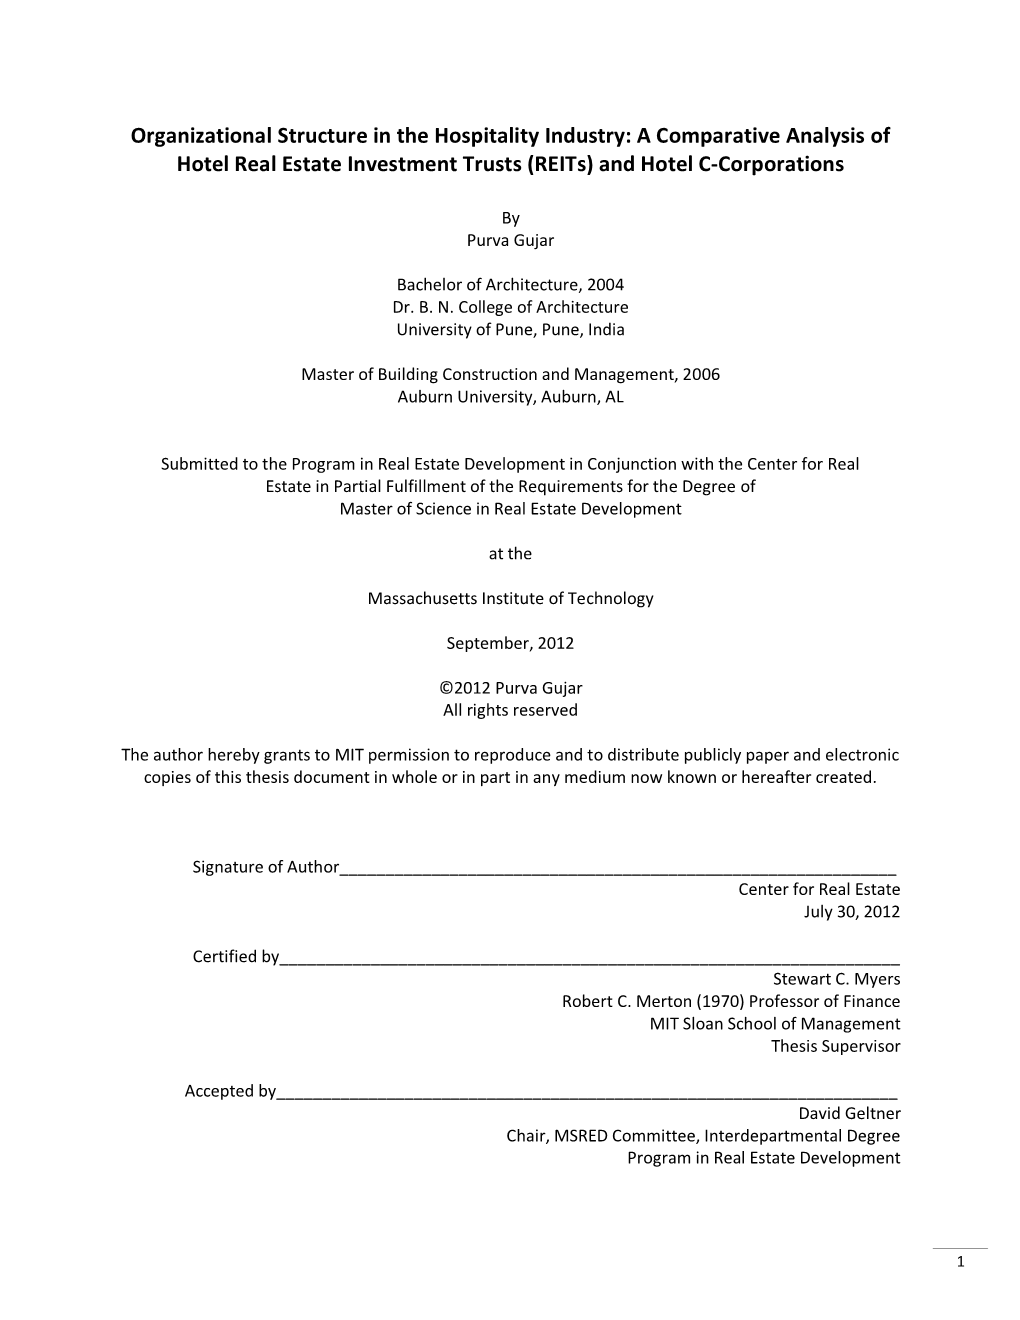 Organizational Structure in the Hospitality Industry: a Comparative Analysis of Hotel Real Estate Investment Trusts (Reits) and Hotel C-Corporations